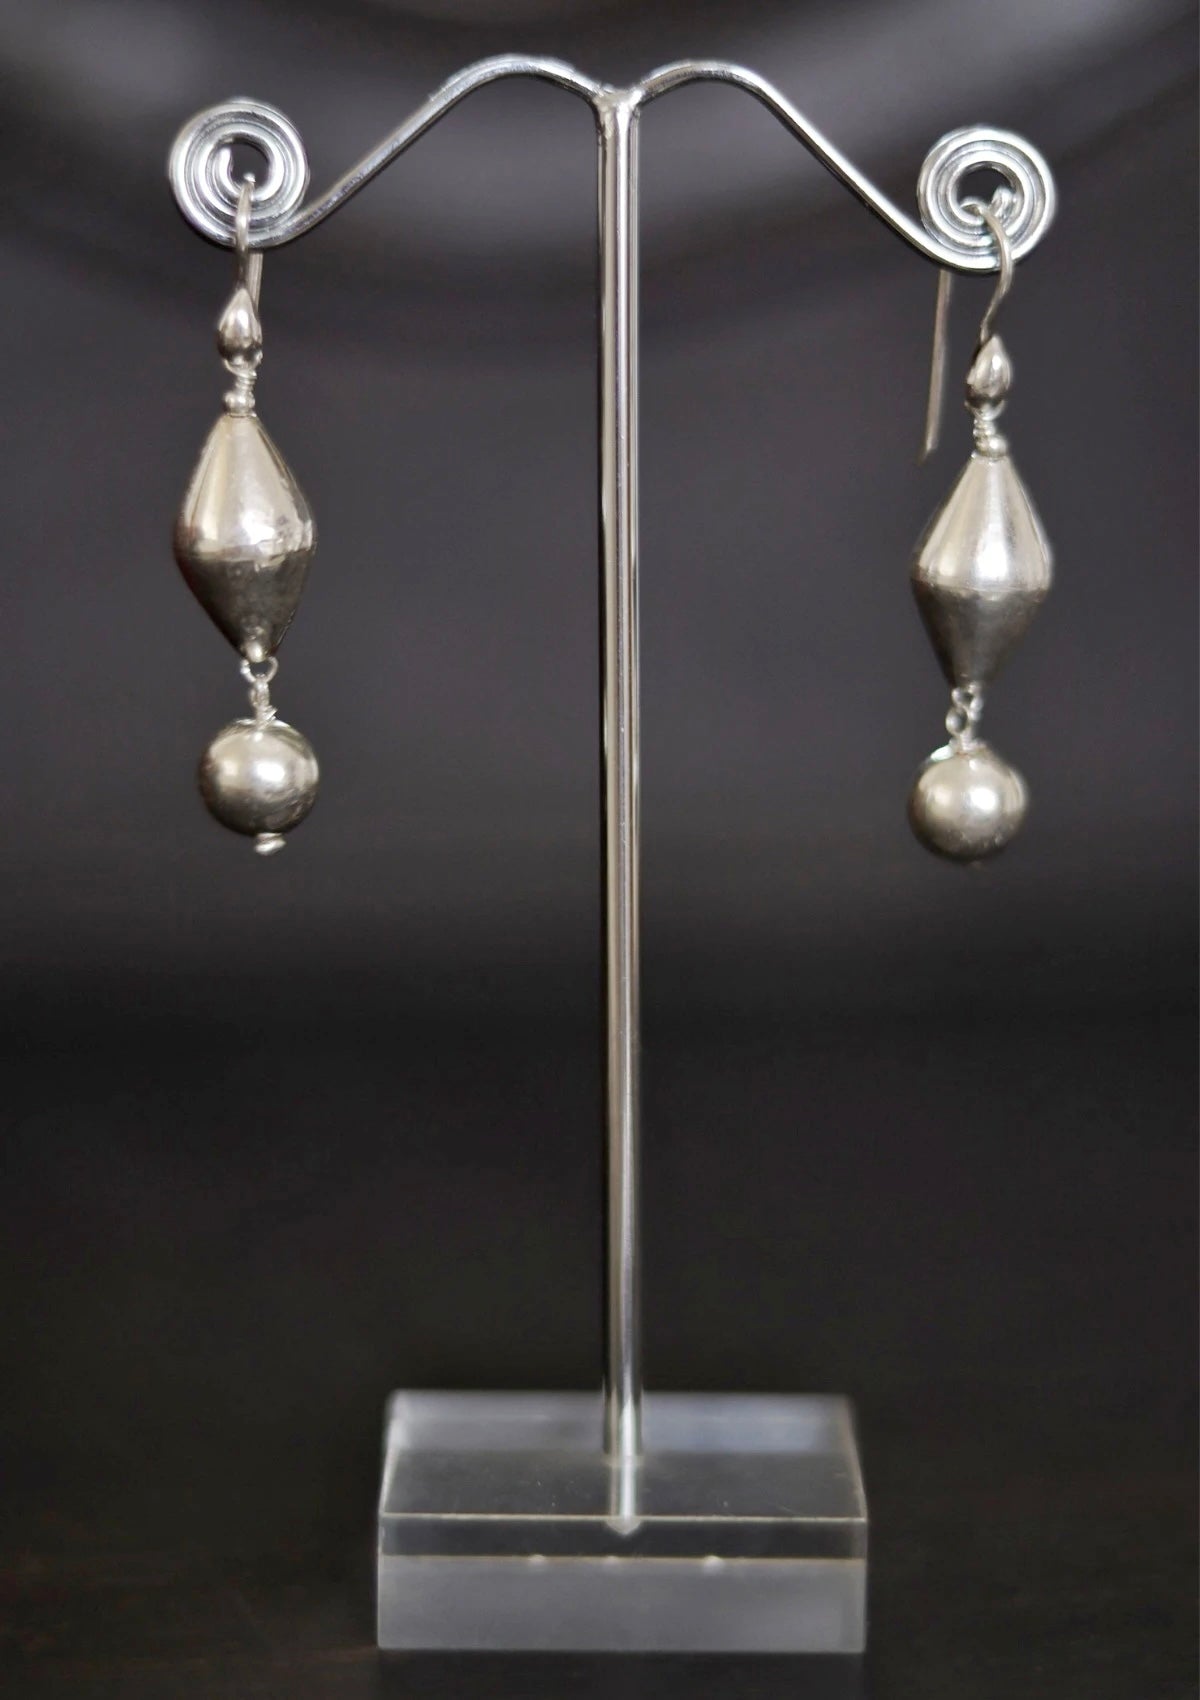 Mix Dholki Beads Silver Earrings